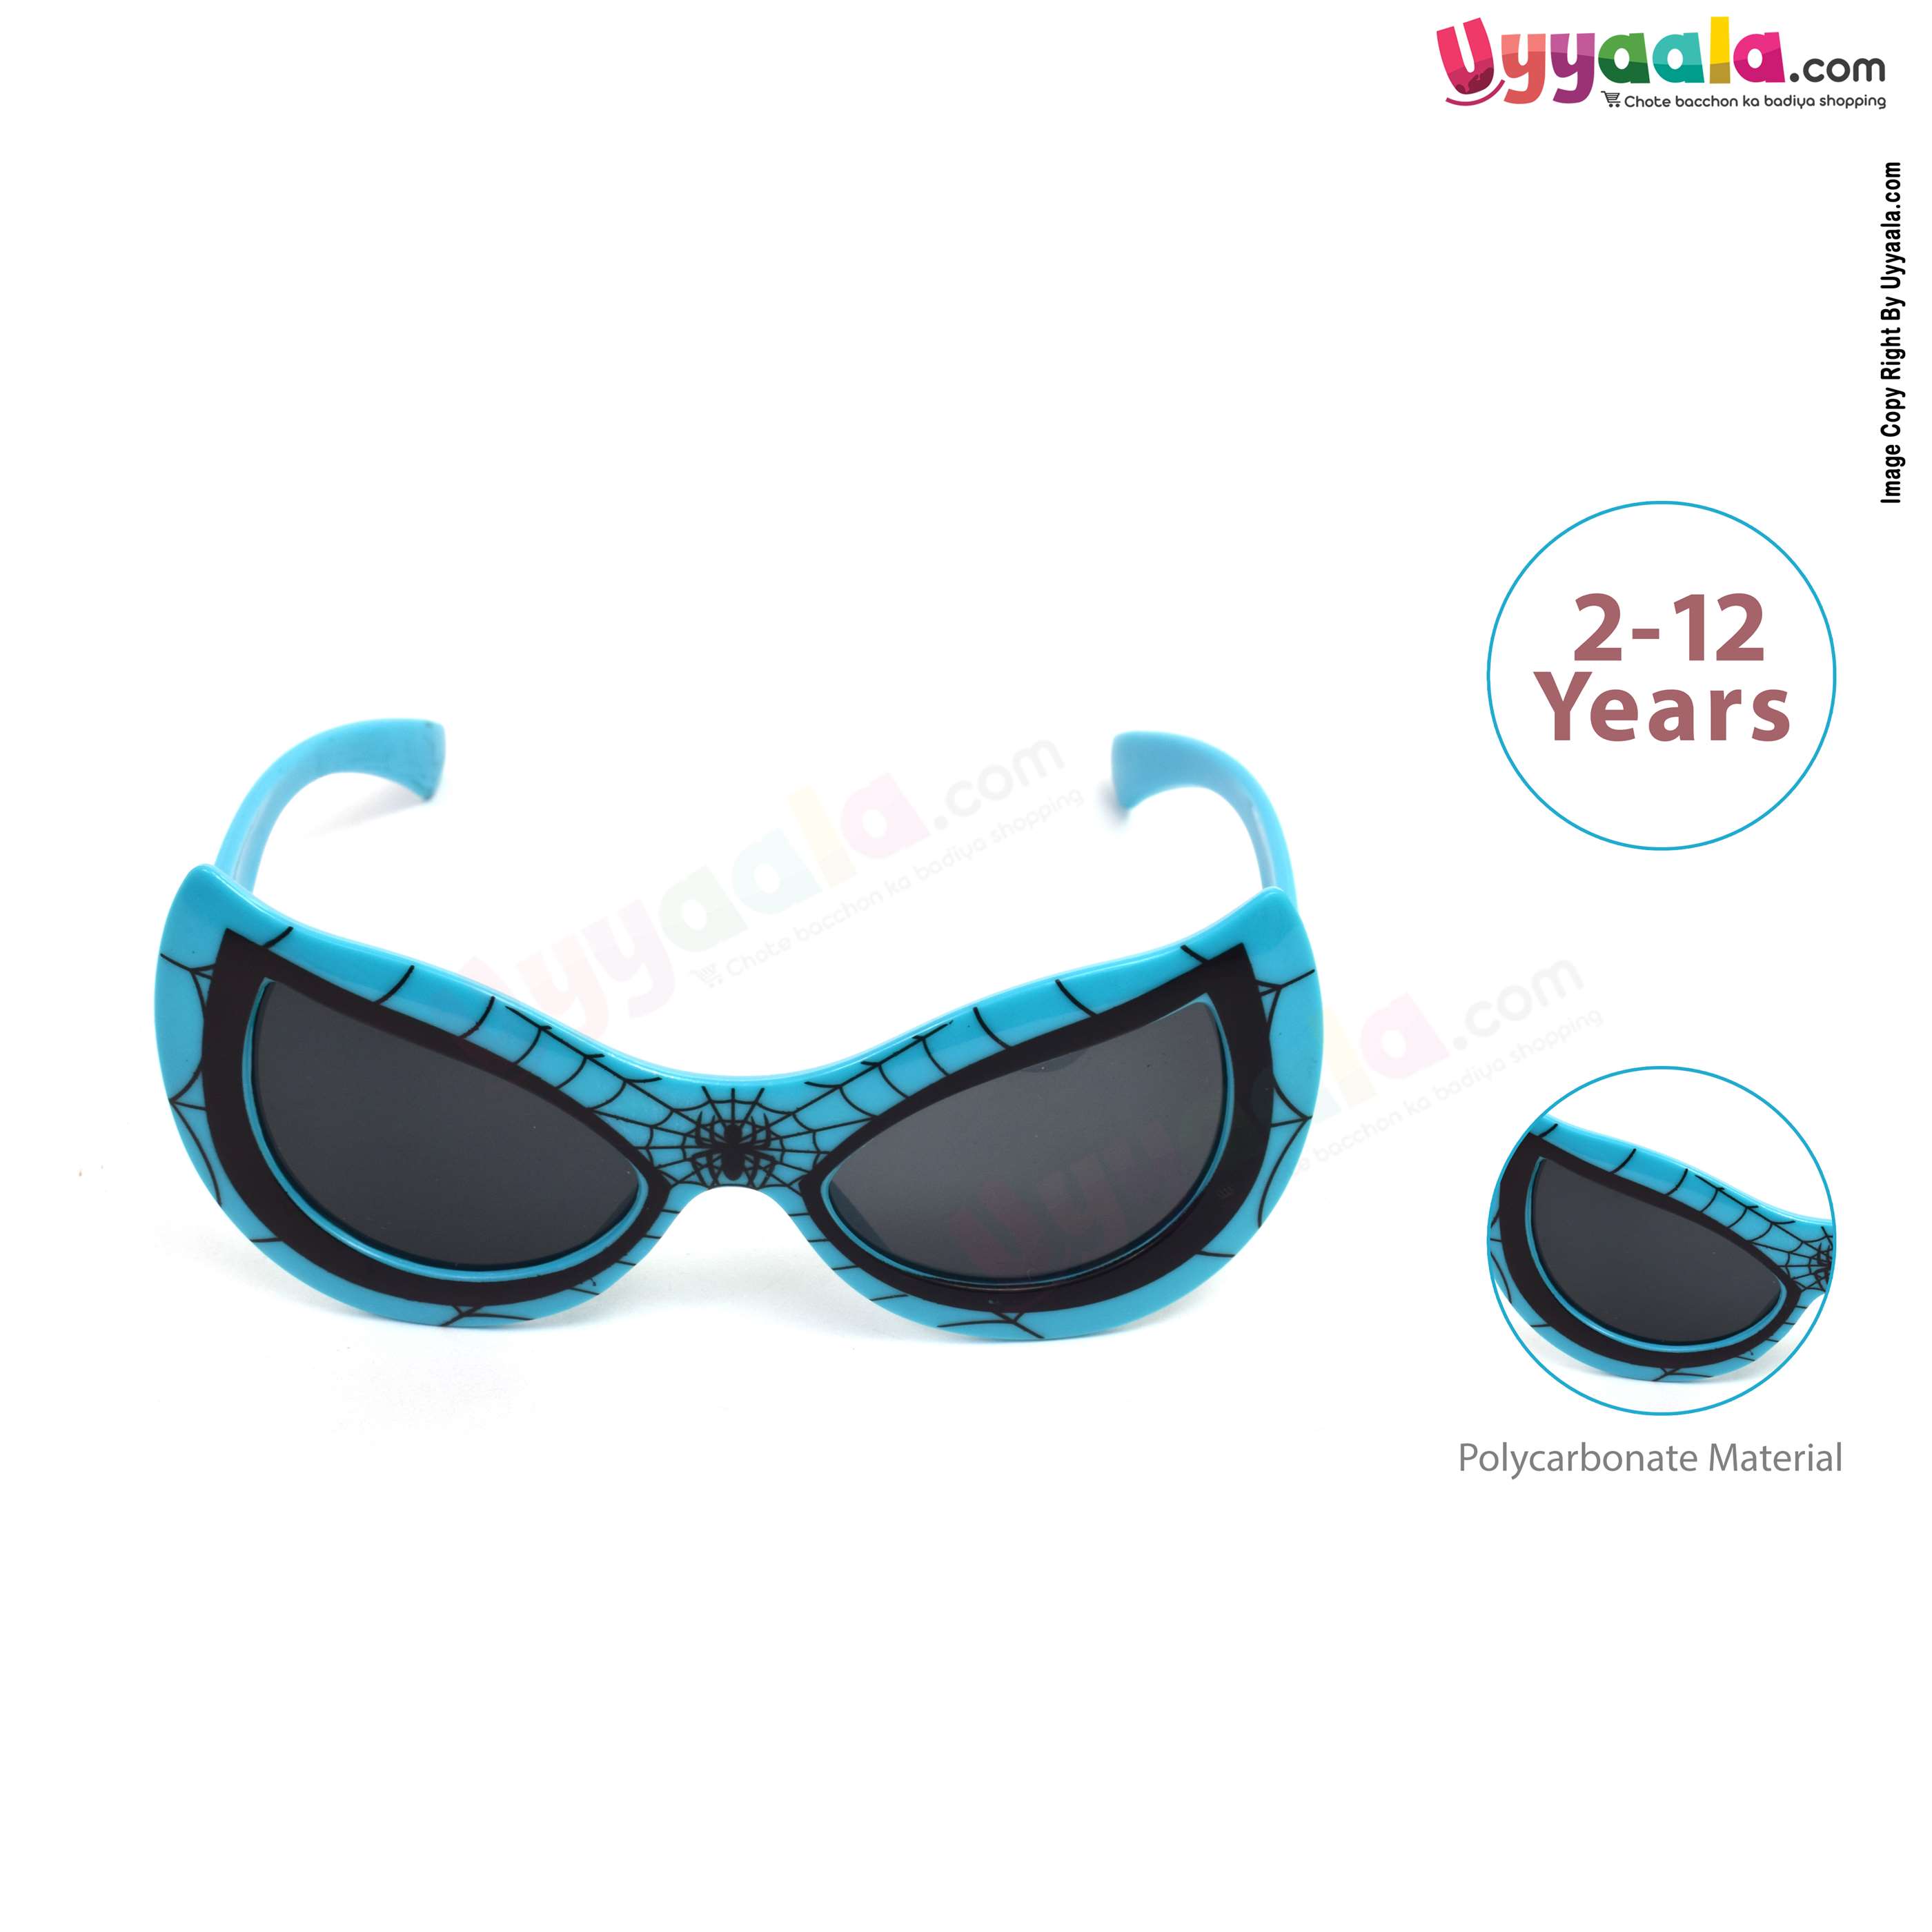 Stylish spider-man tinted cat-eye sunglasses for kids - sky blue with black web print, 2 - 12 years